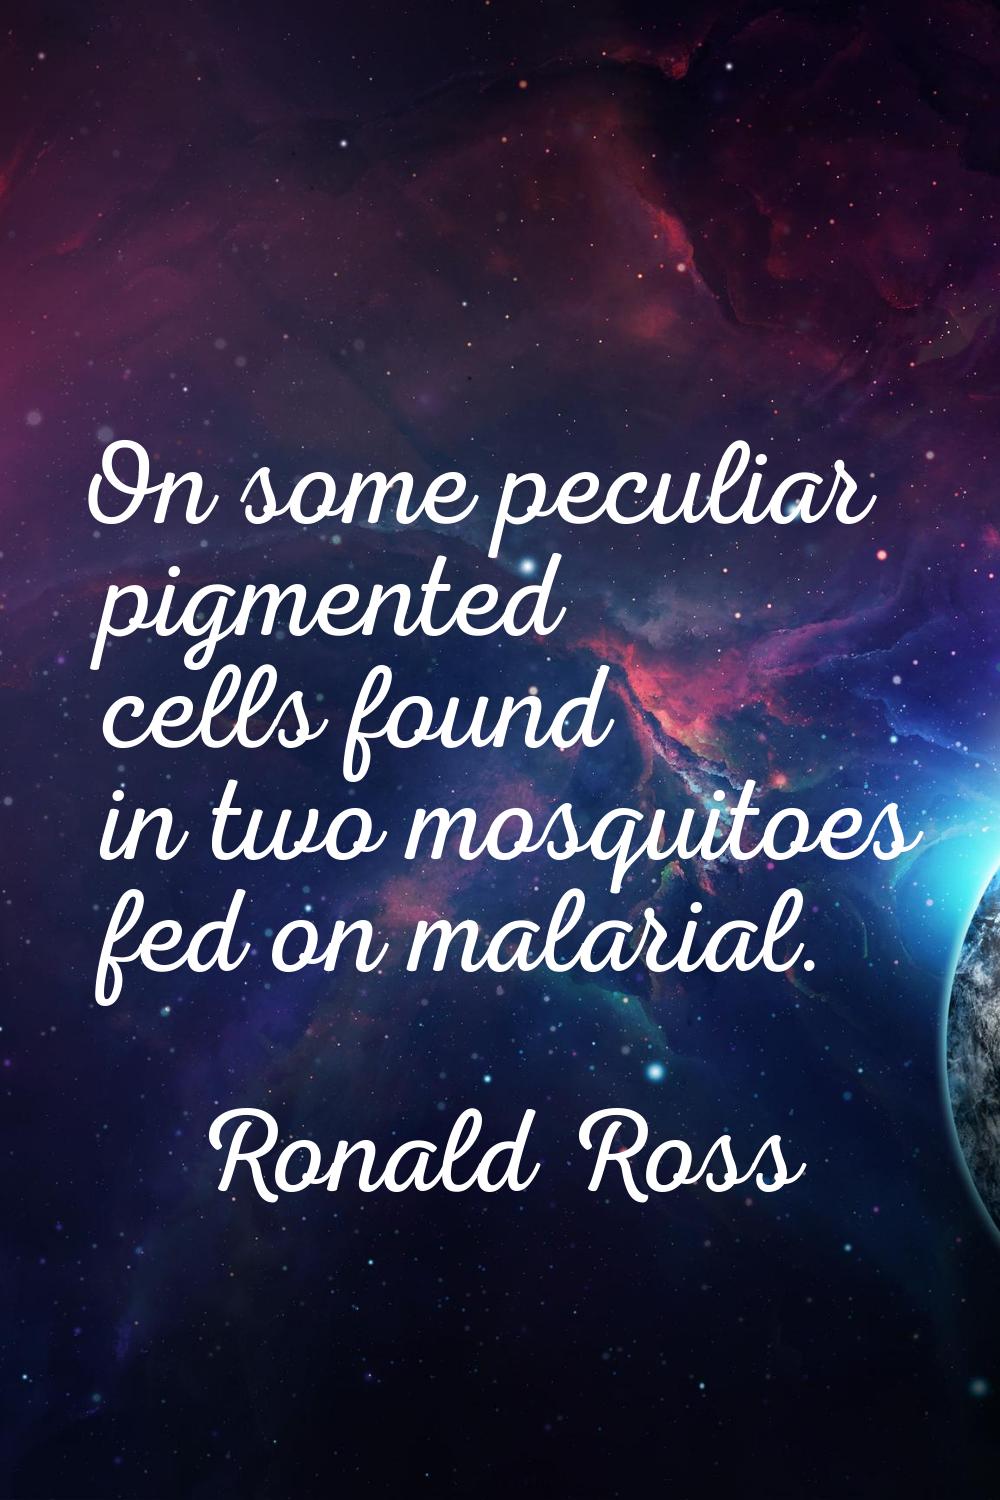 On some peculiar pigmented cells found in two mosquitoes fed on malarial.